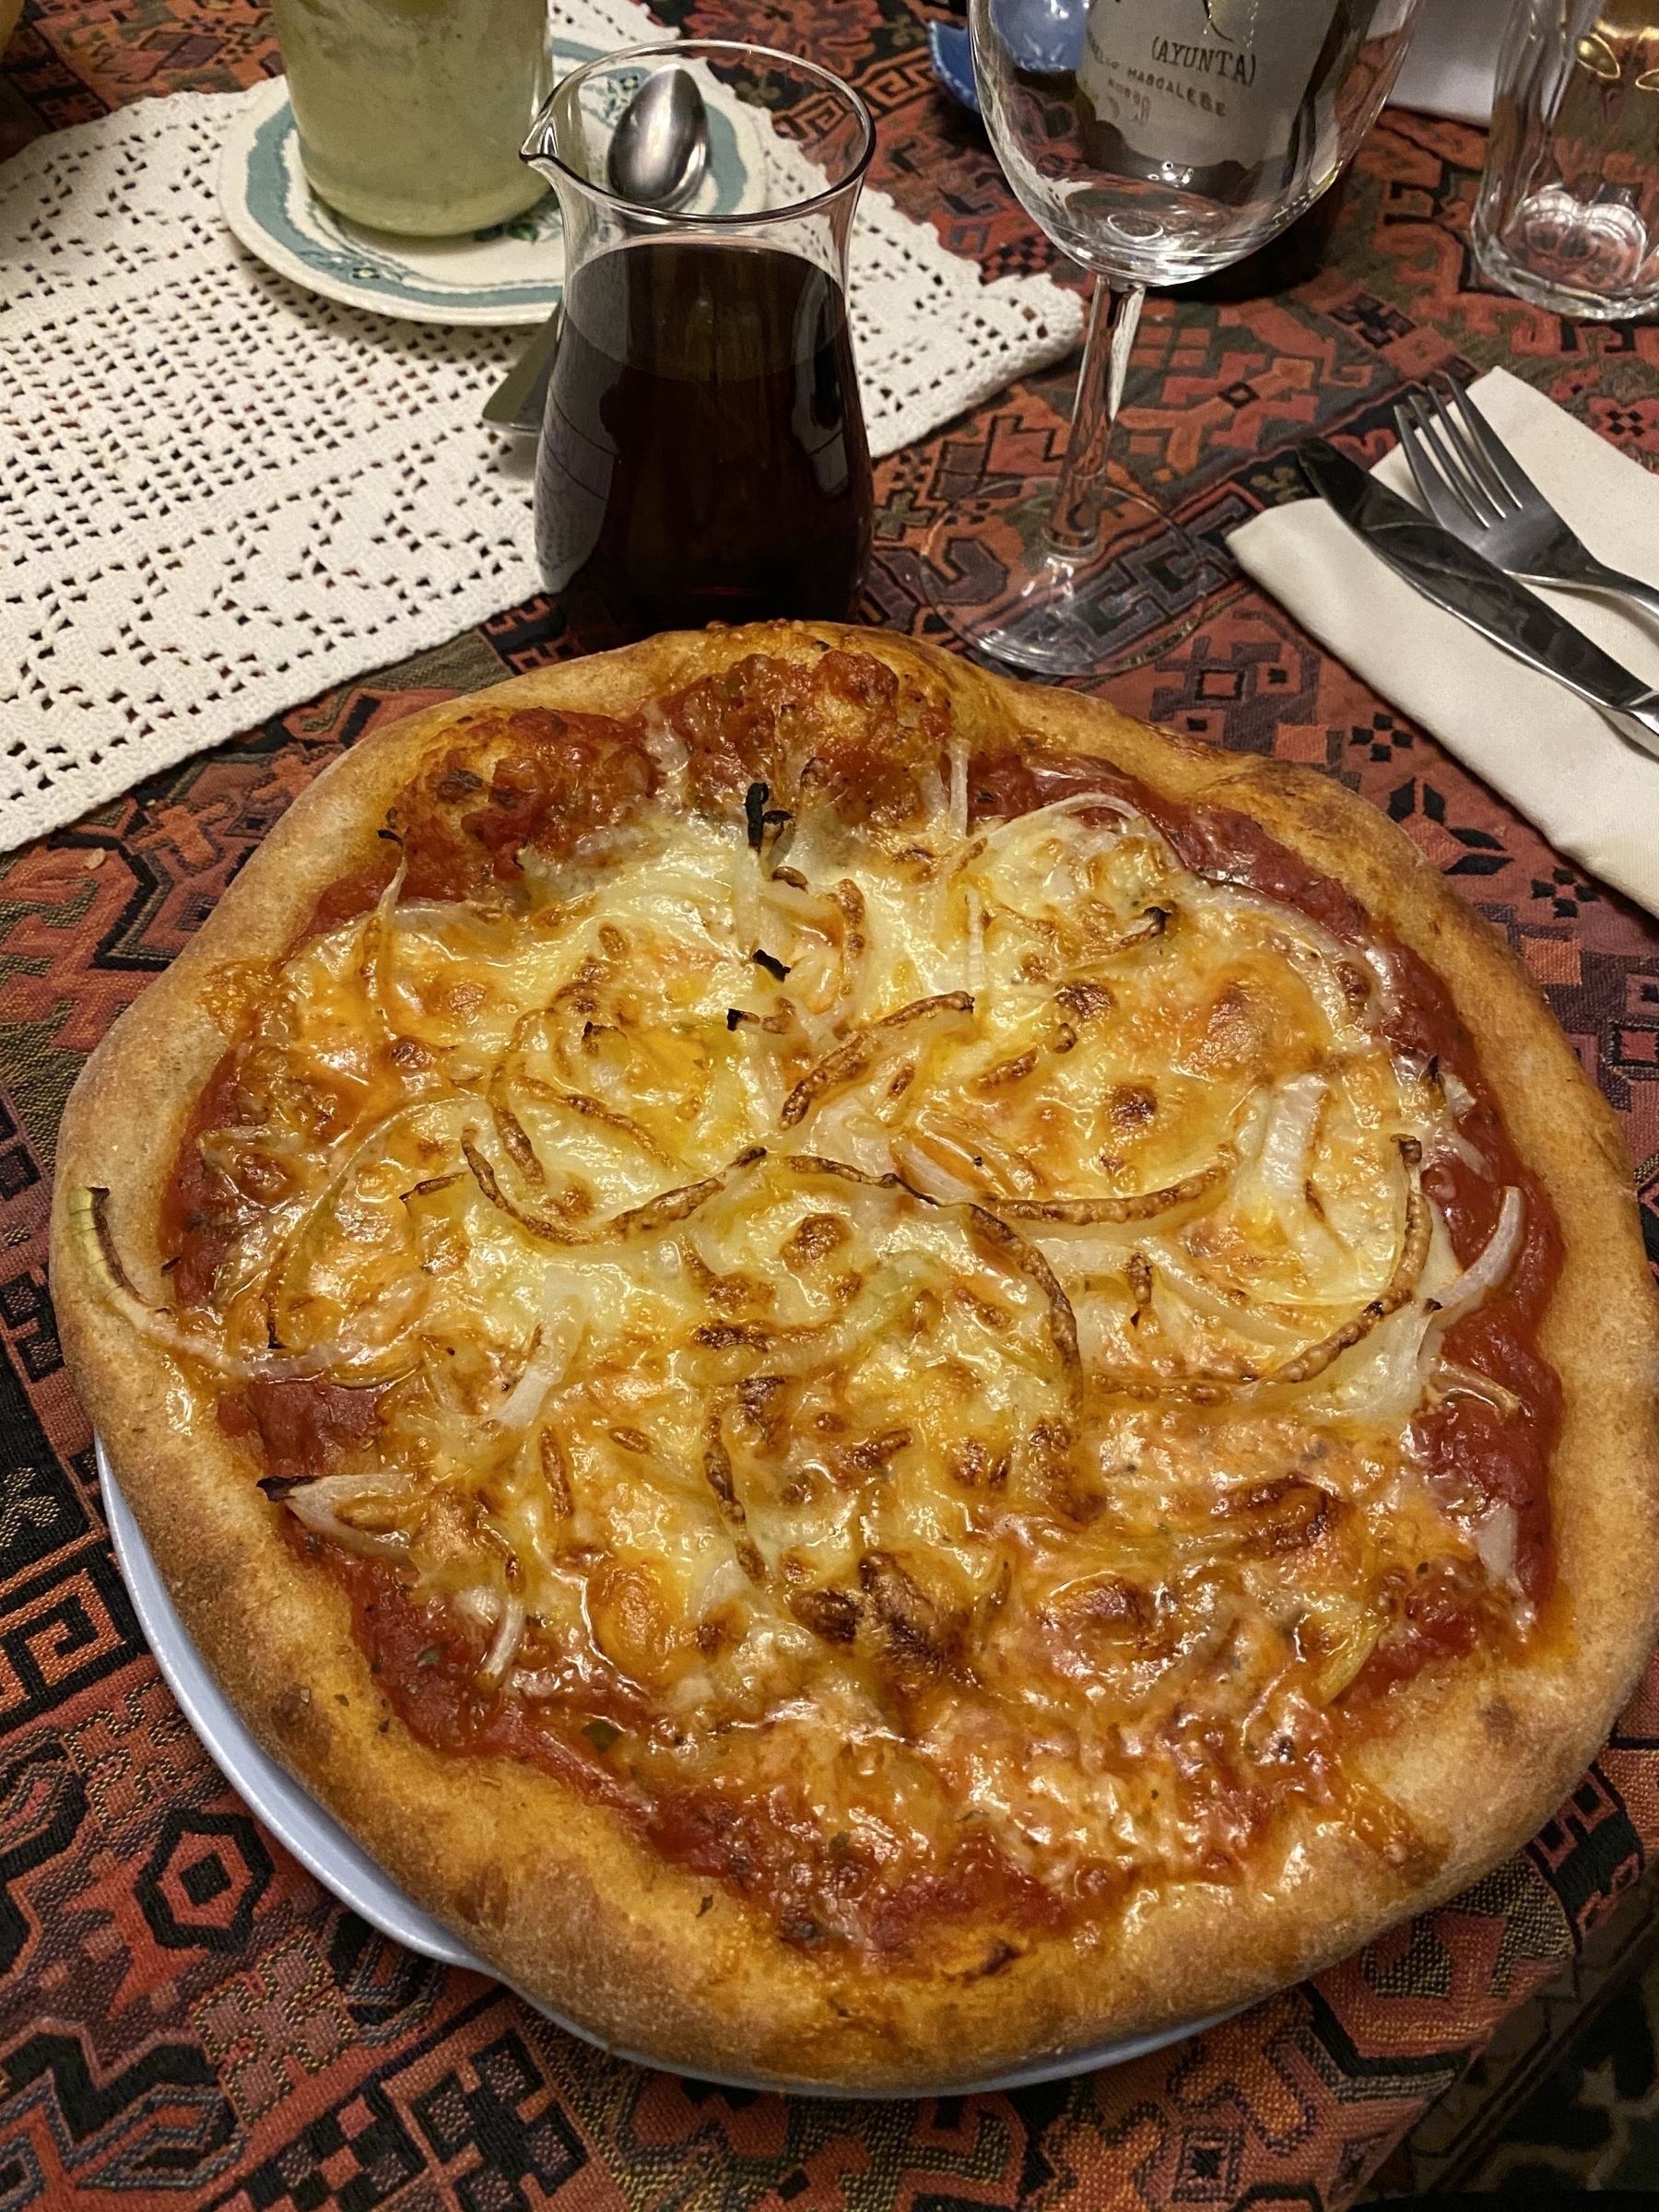 Small pizza on a plate next to a glass of wine.